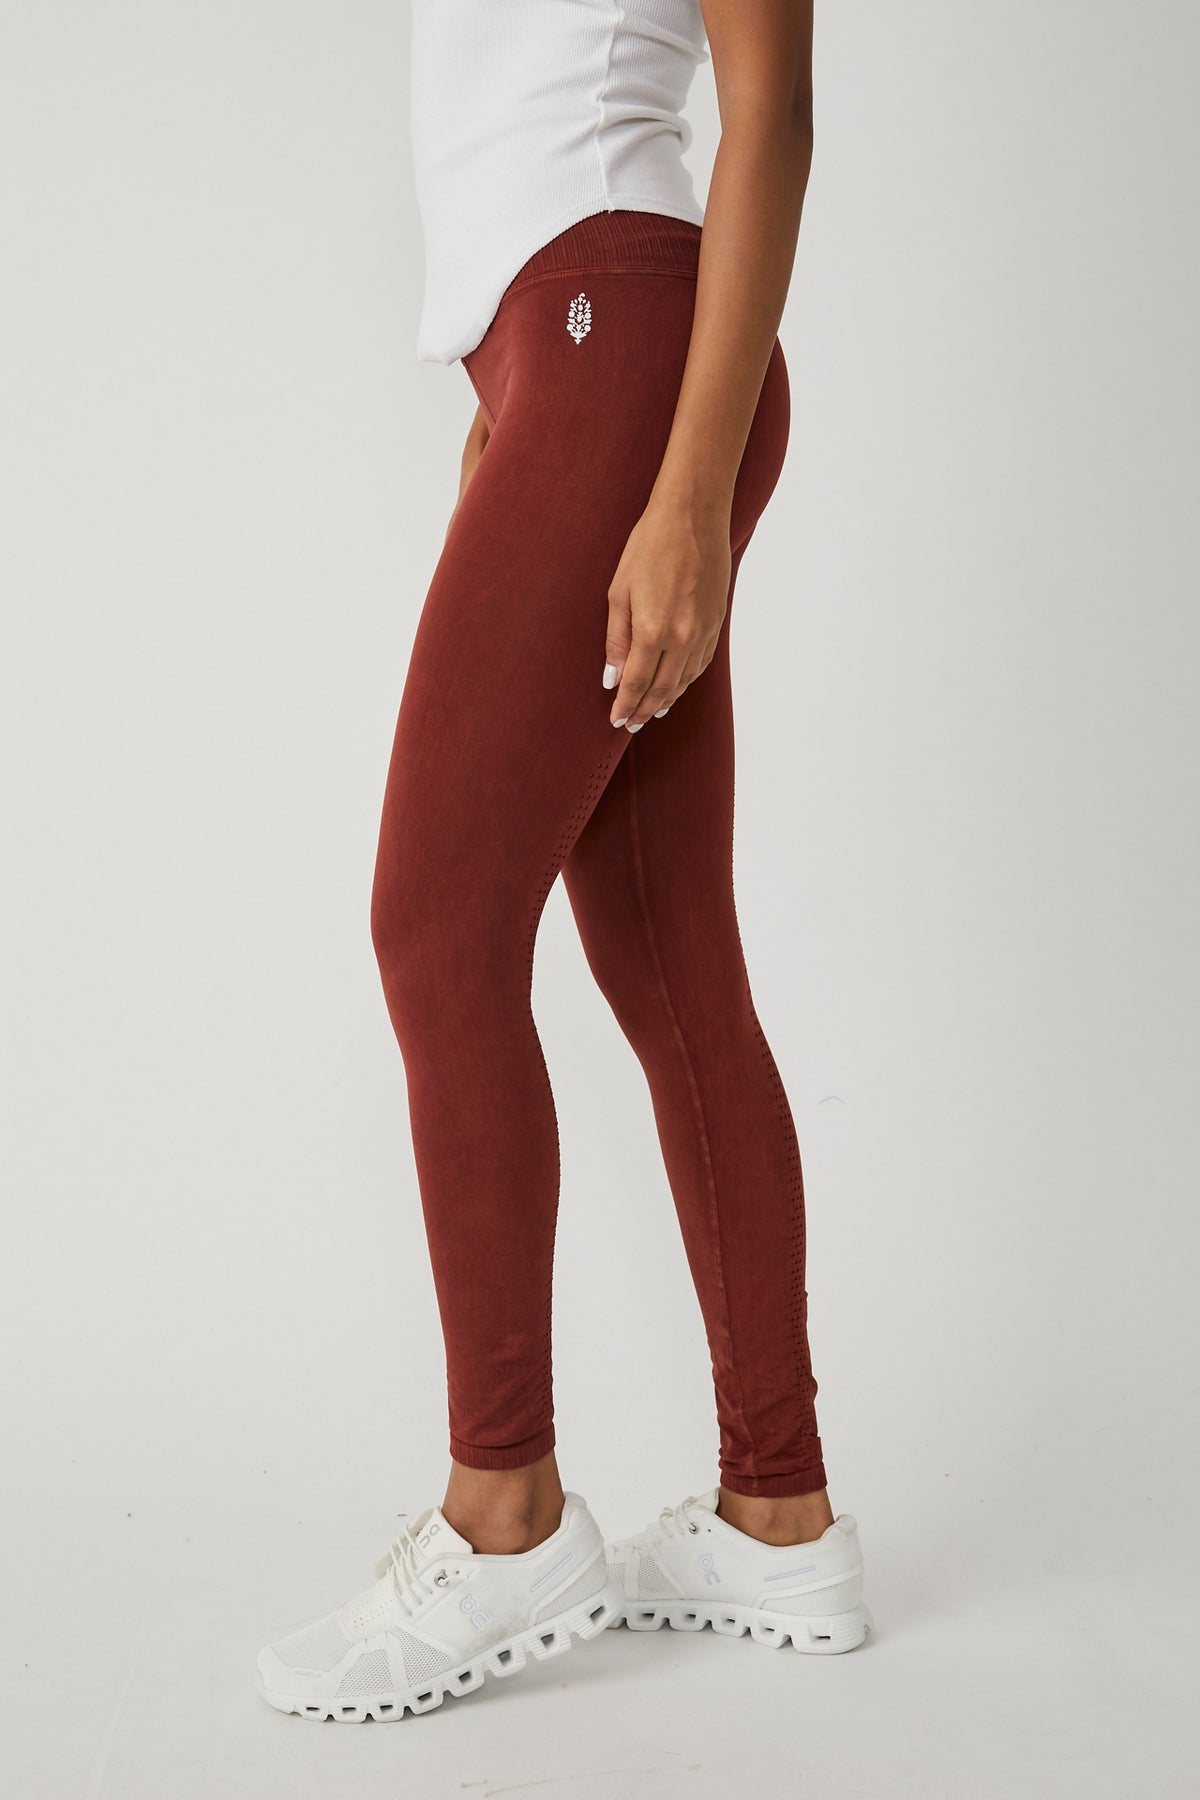 Free People Movement High Rise 7/8 Length Good Karma Leggings Size Medium/ Large Brown - $49 - From Adrienne